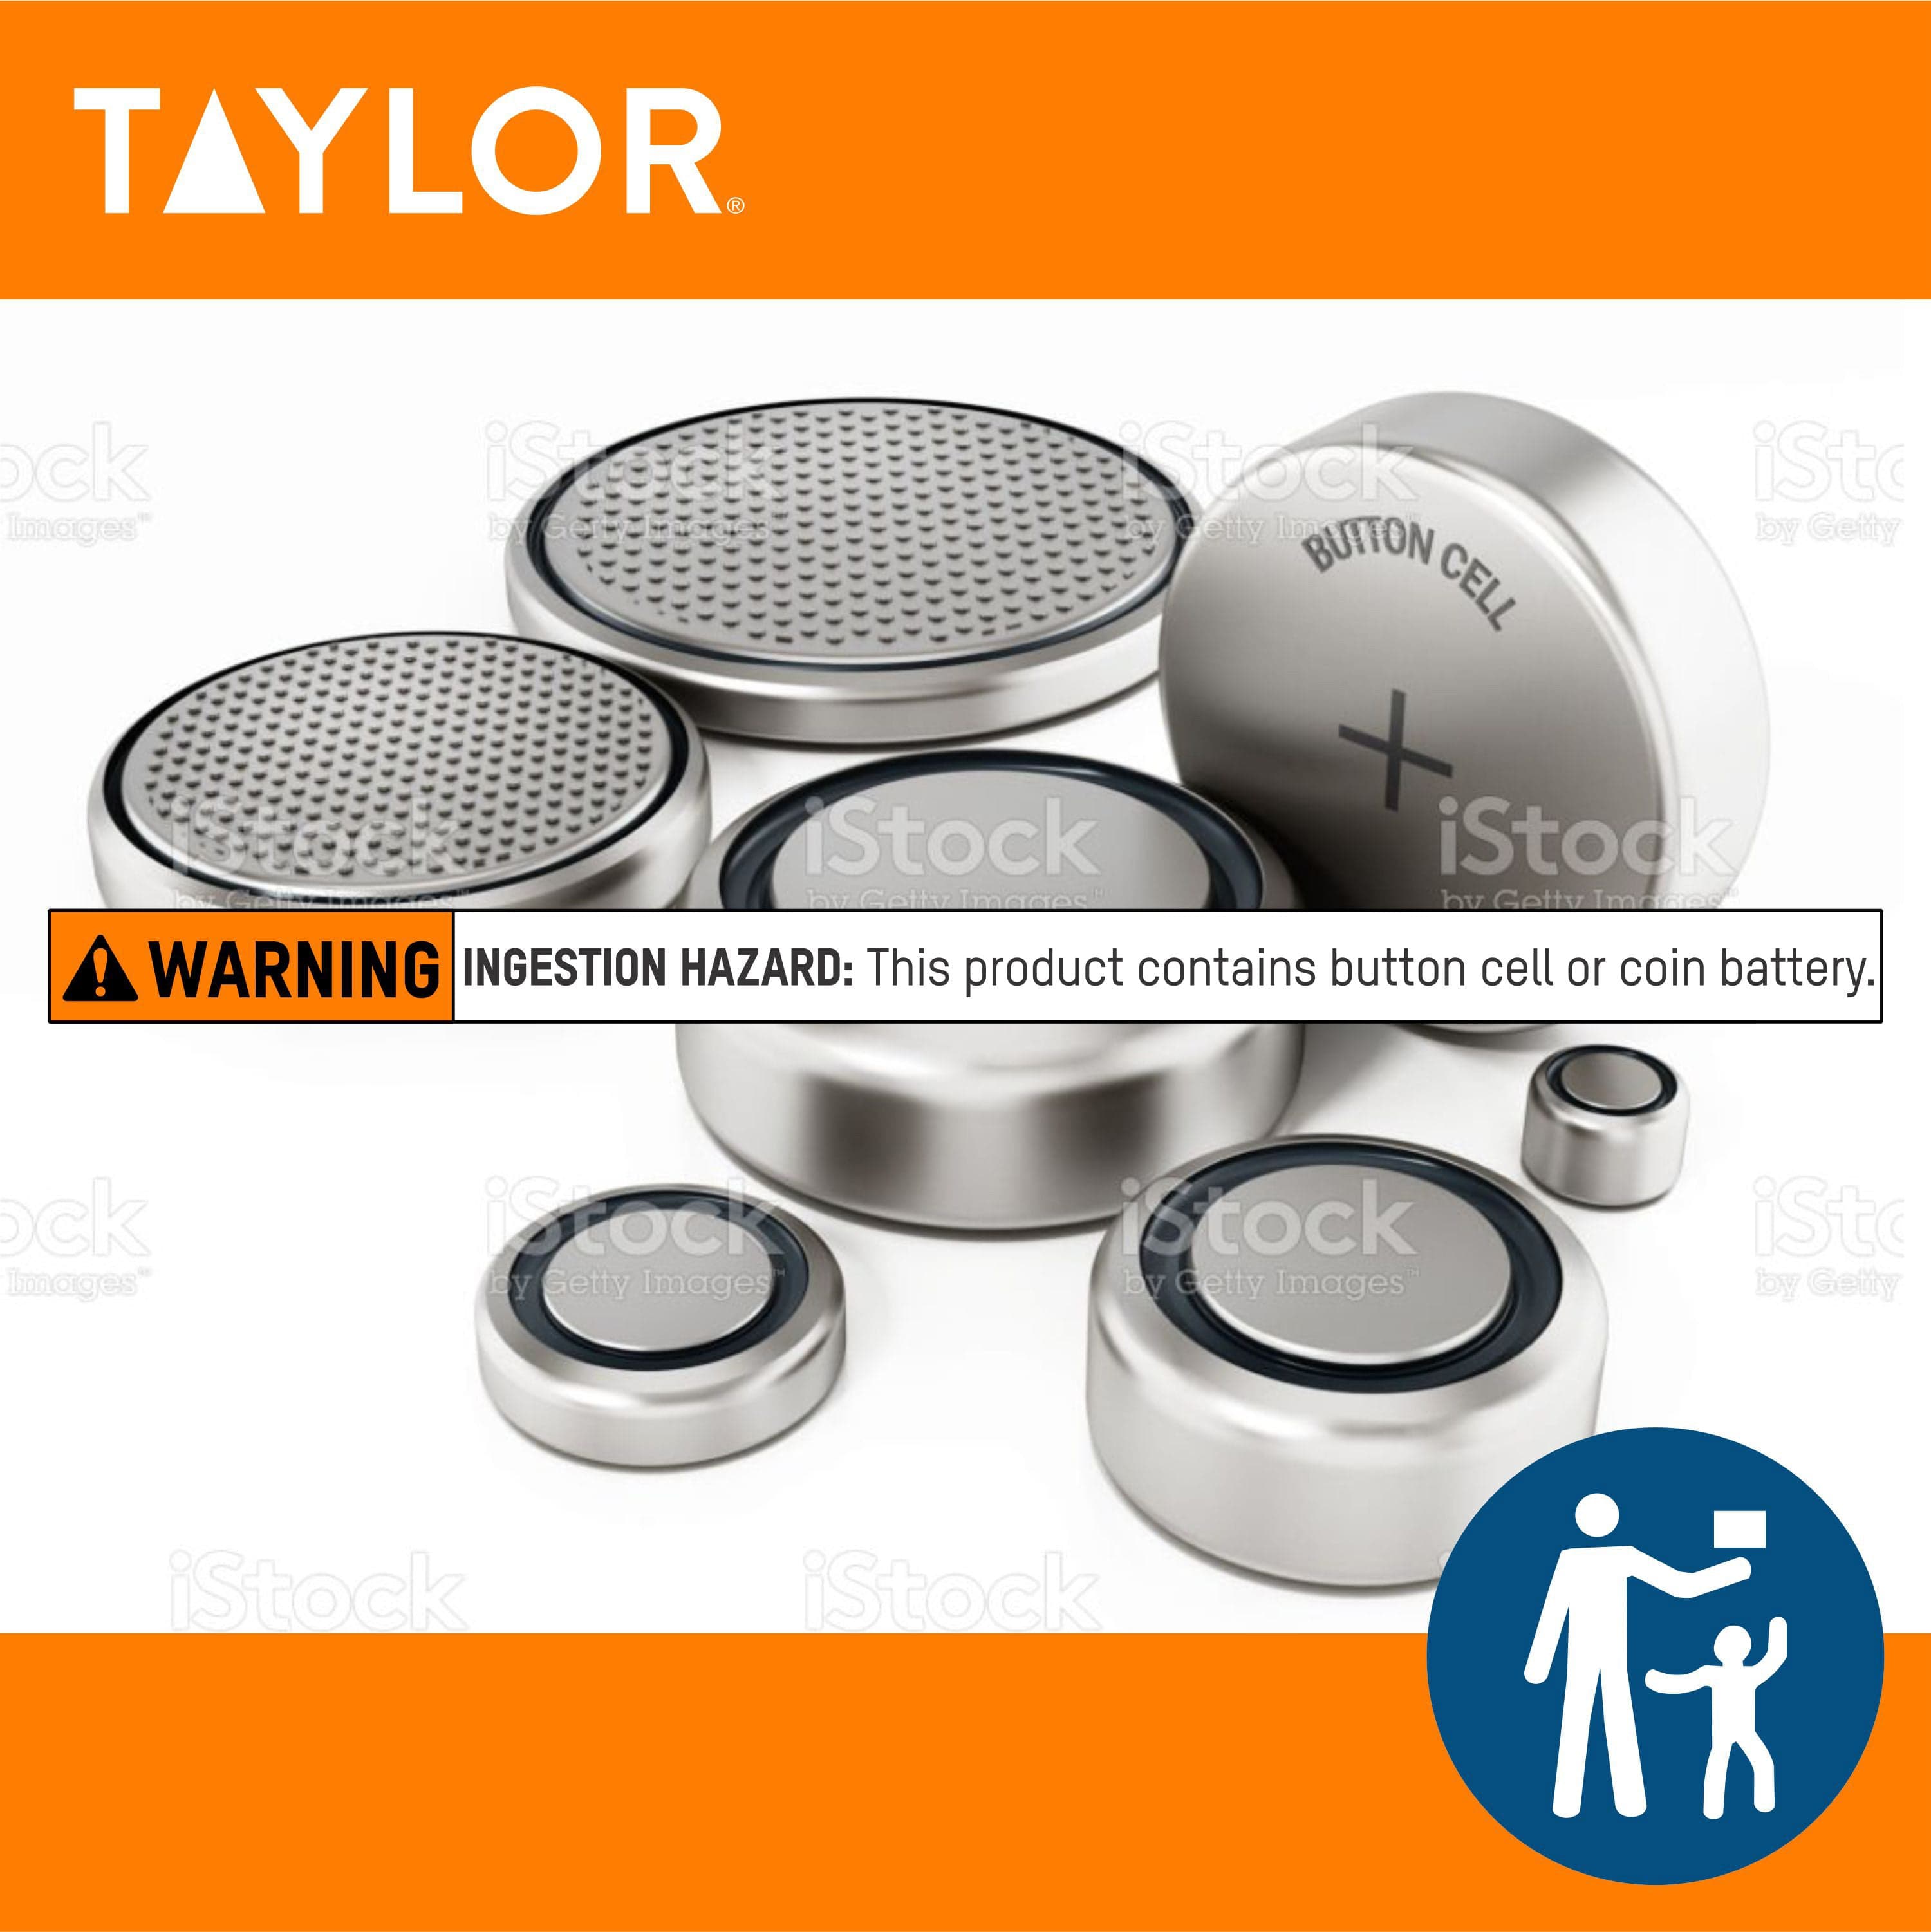 Taylor Kitchen Scale - 077784039069